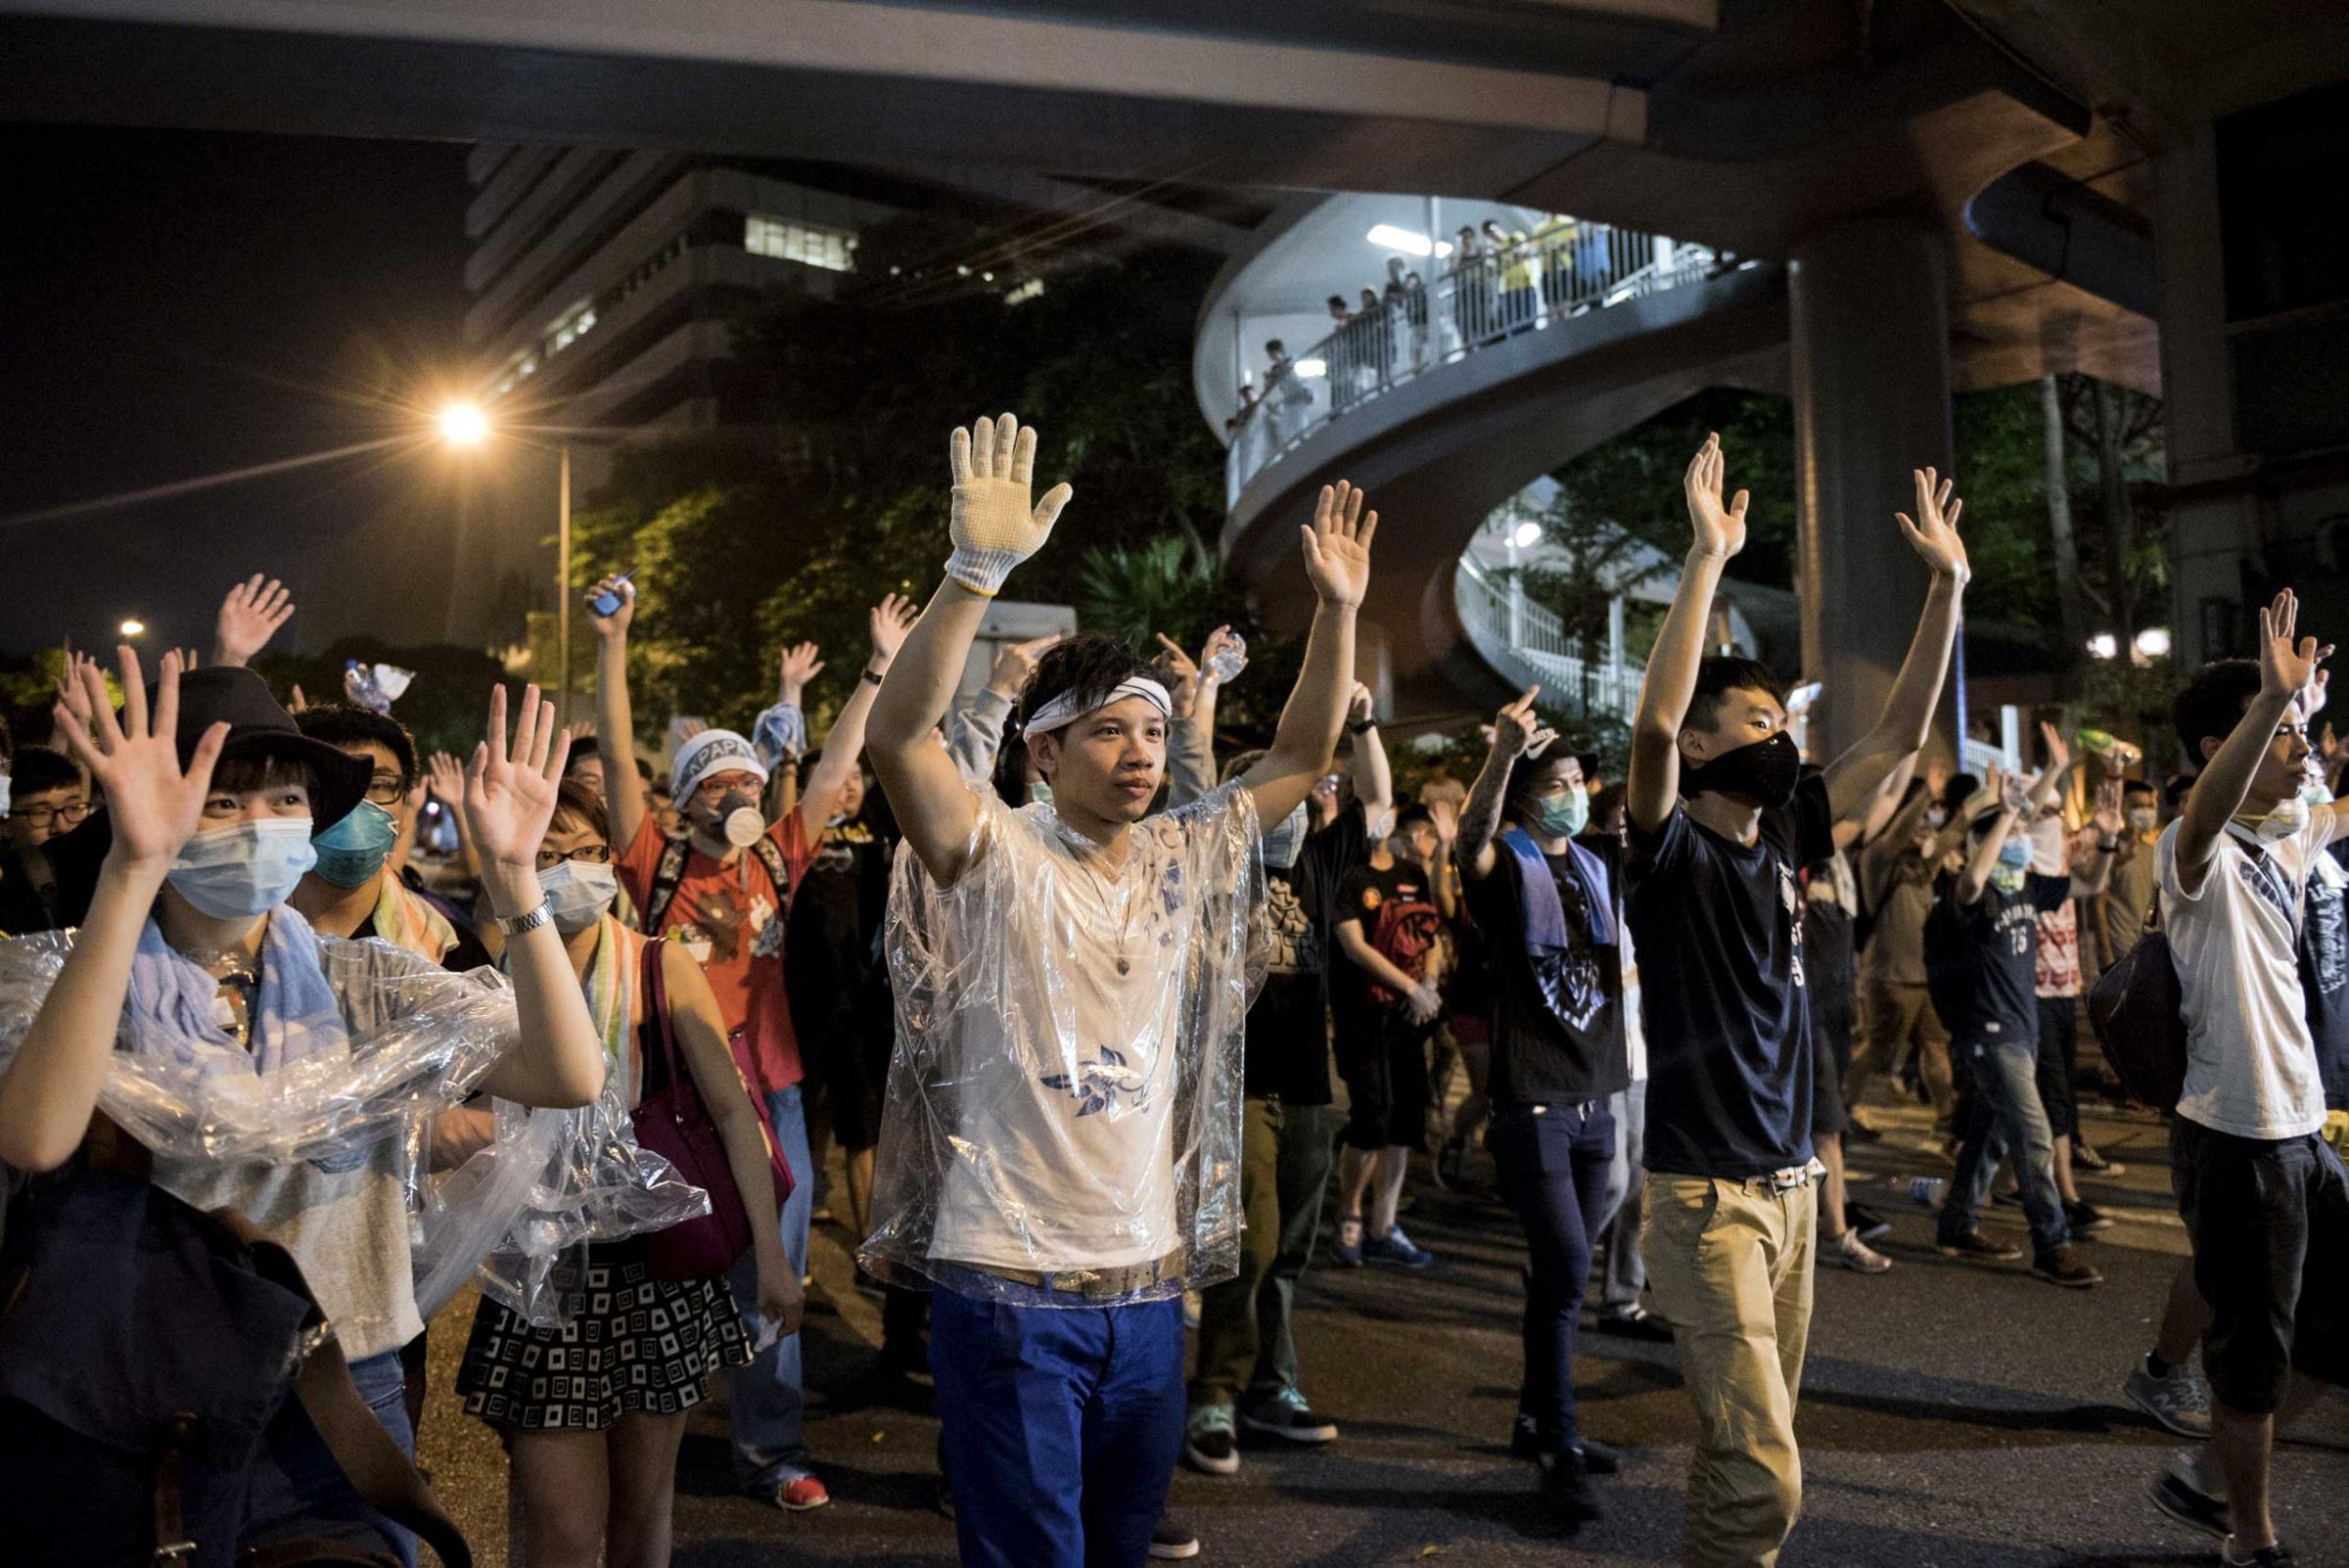 Pro-democracy protesters put their hands up in the air in front of the police in Hong Kong on Sept. 28, 2014.